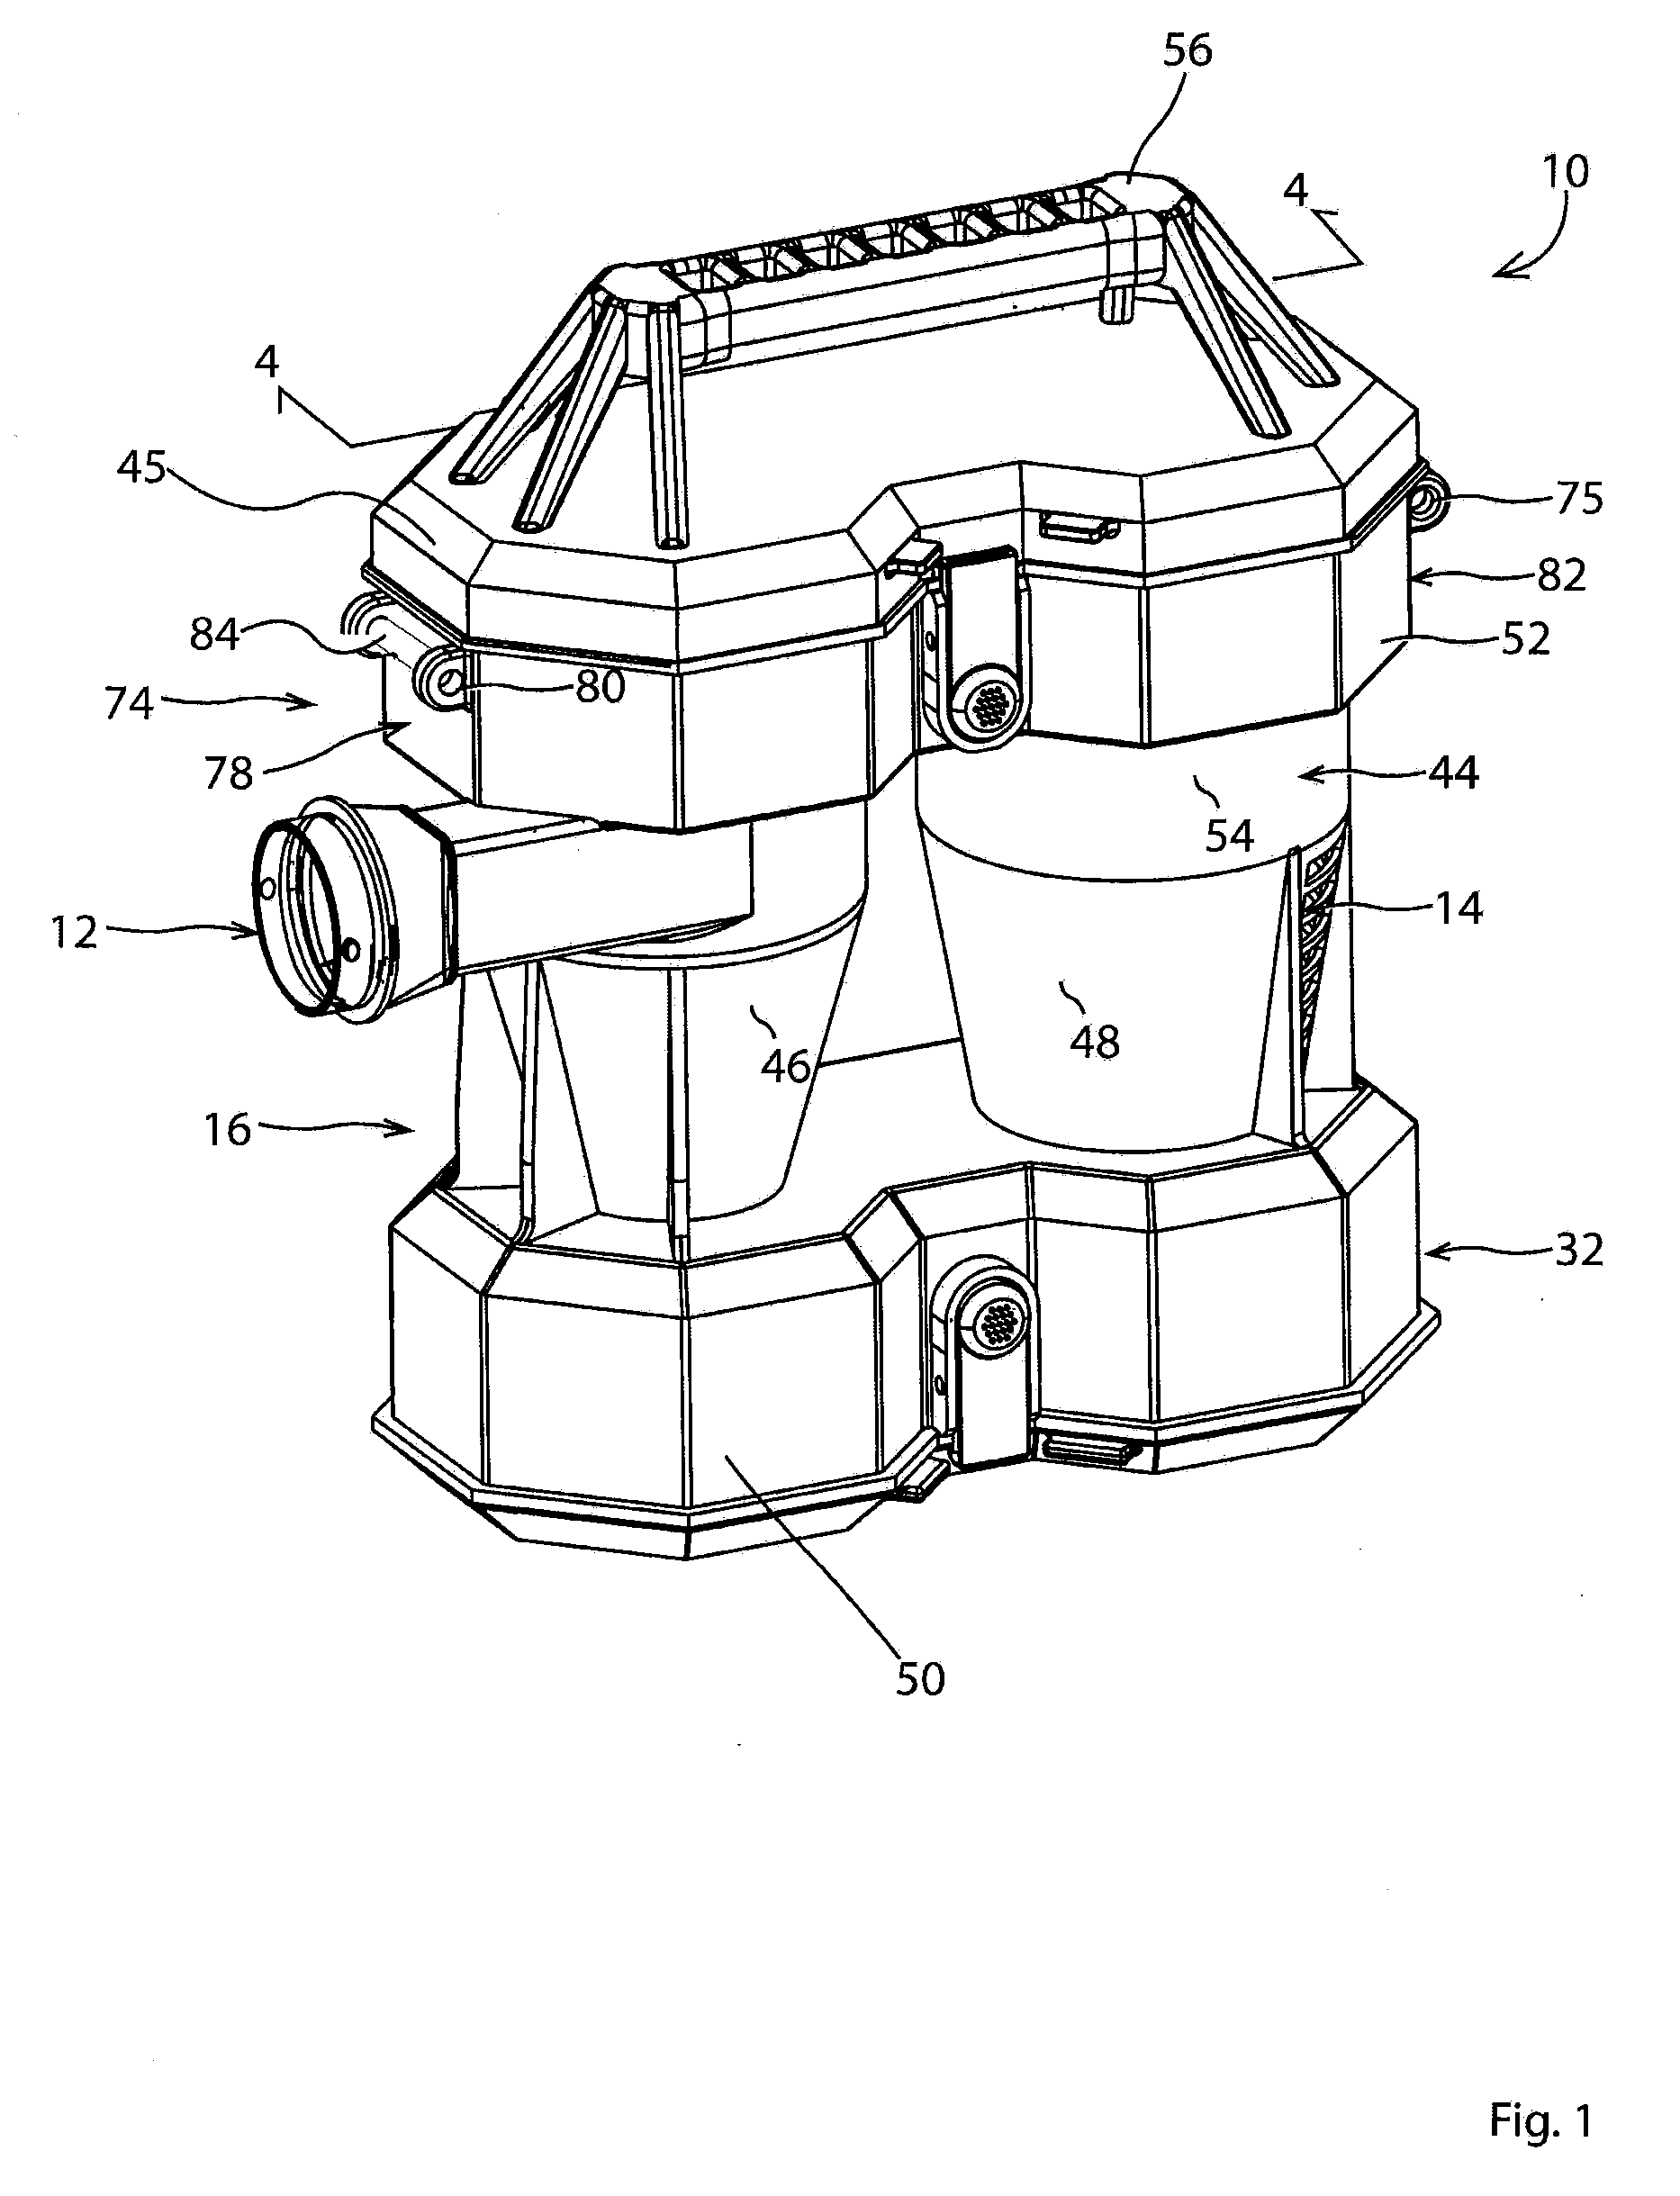 Surface cleaning apparatus with shoulder strap reel